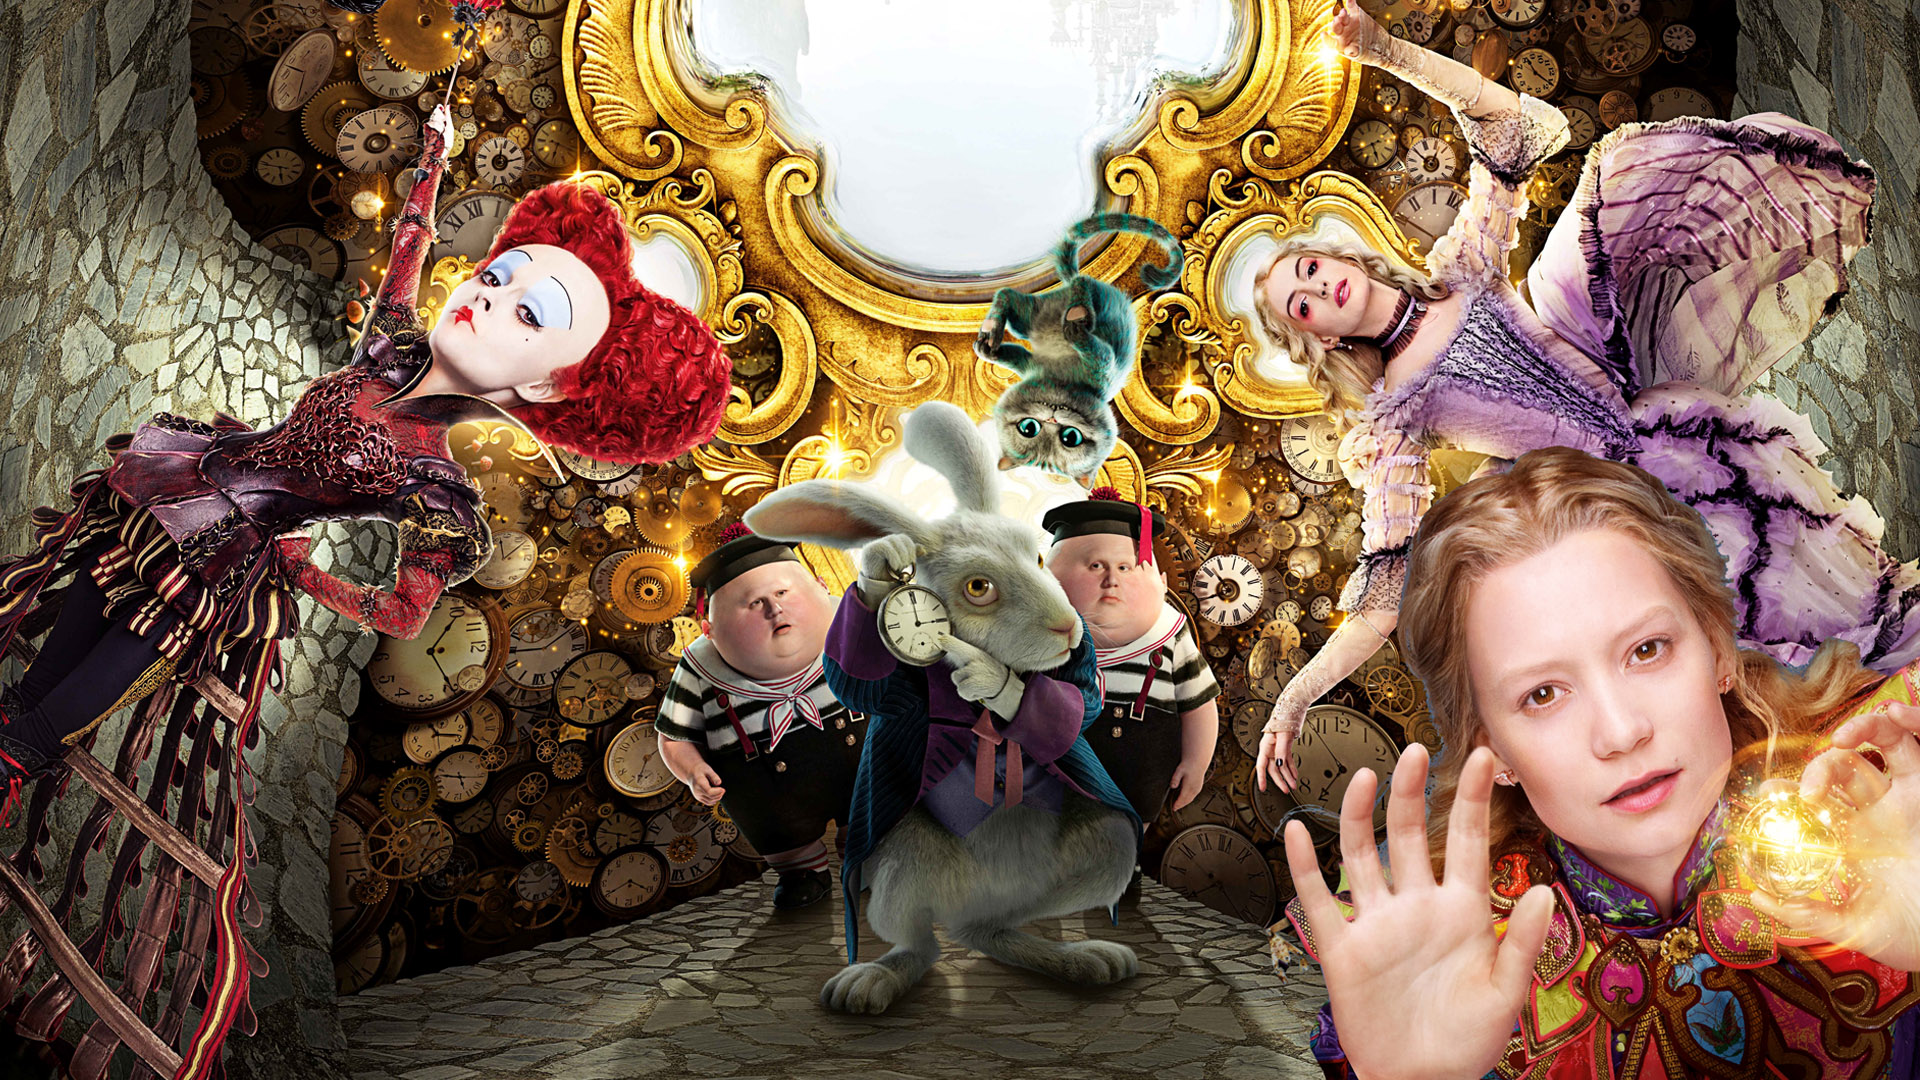 Alice Through the Looking Glass (English) movie in hindi free